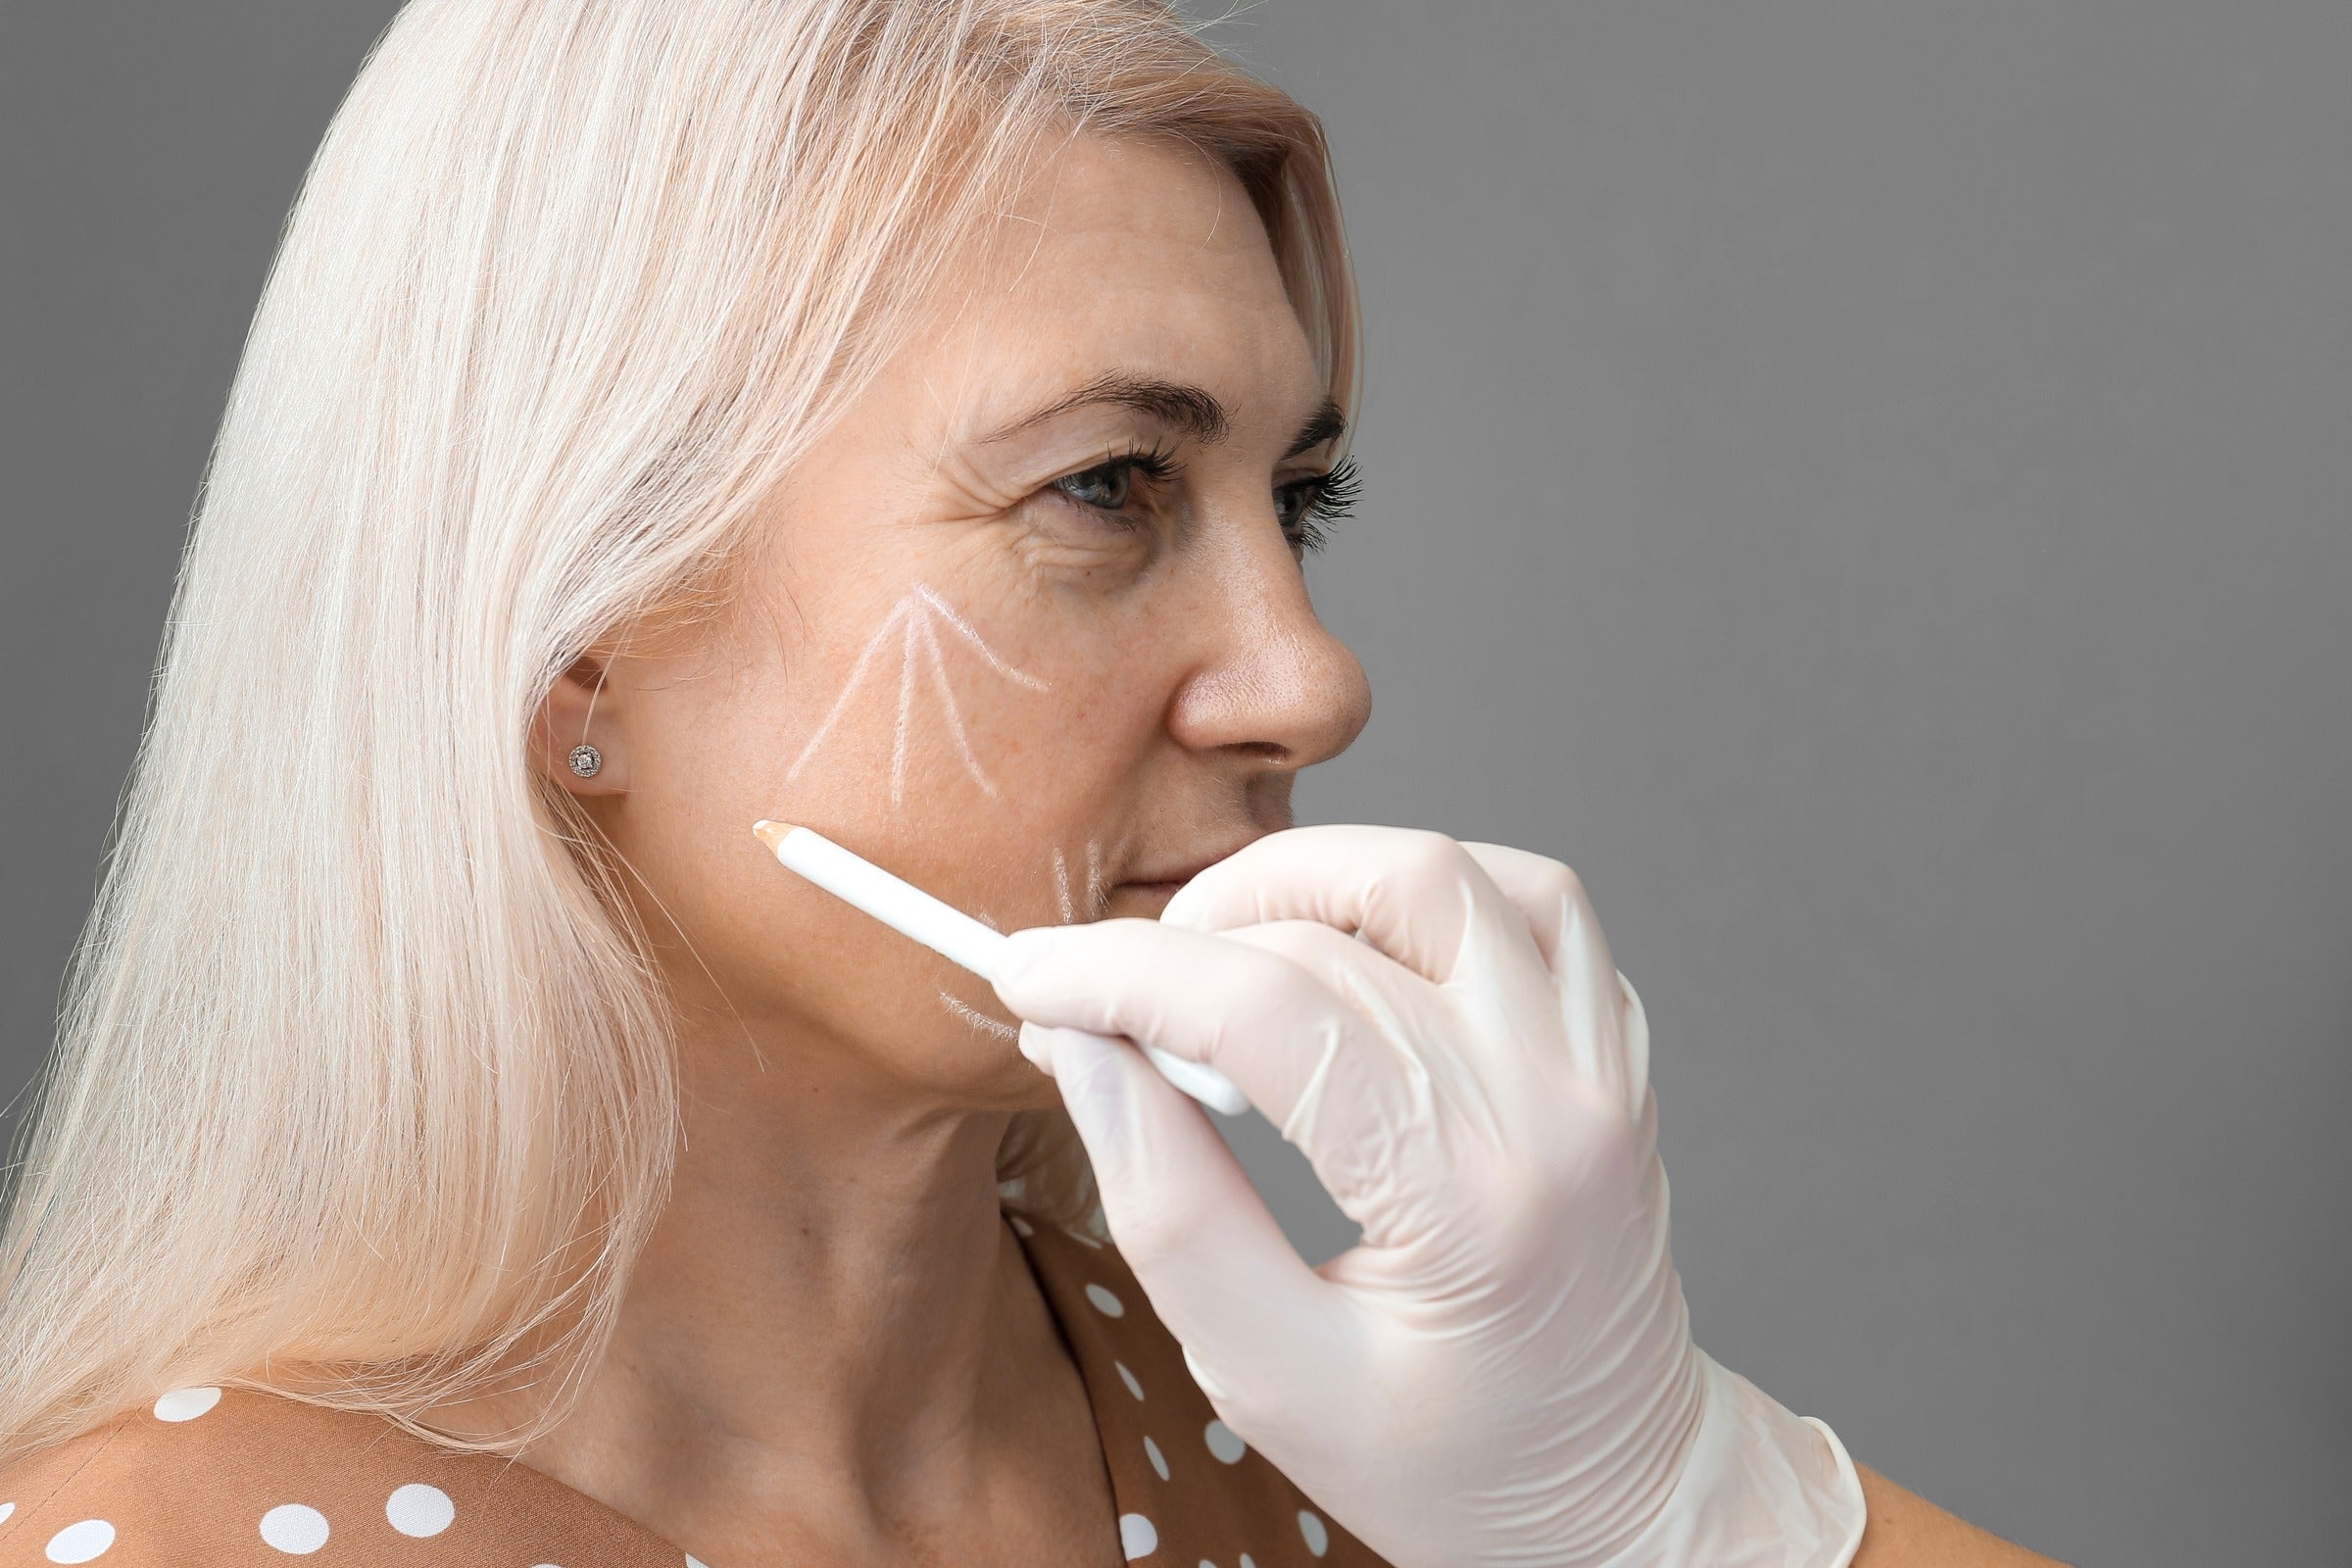 8 Benefits [and 8 Risks] of Botox